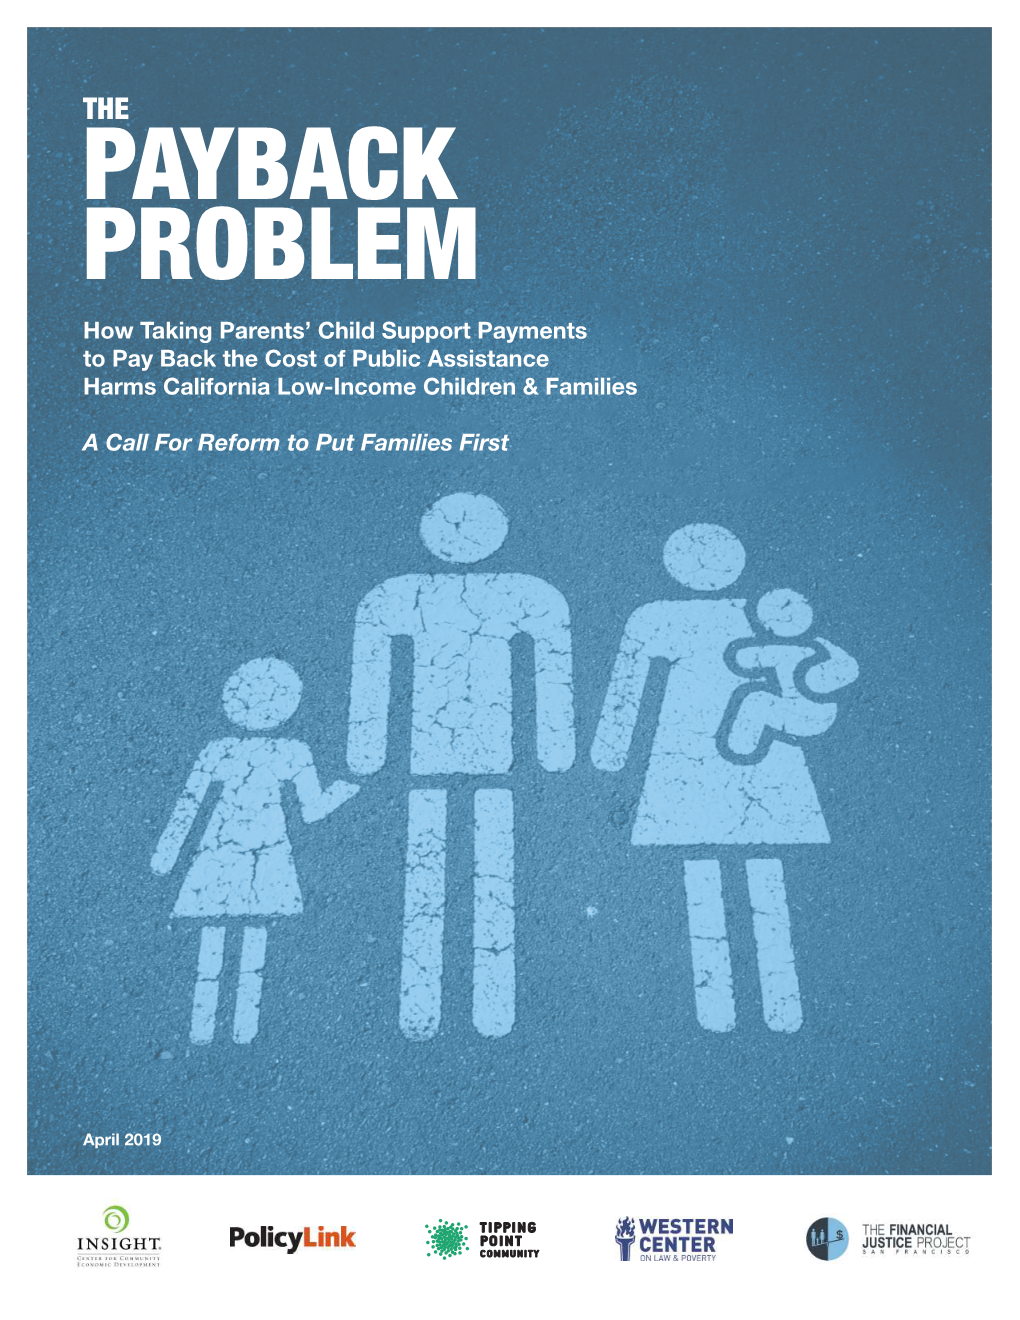 PAYBACK PROBLEM How Taking Parents’ Child Support Payments to Pay Back the Cost of Public Assistance Harms California Low-Income Children & Families